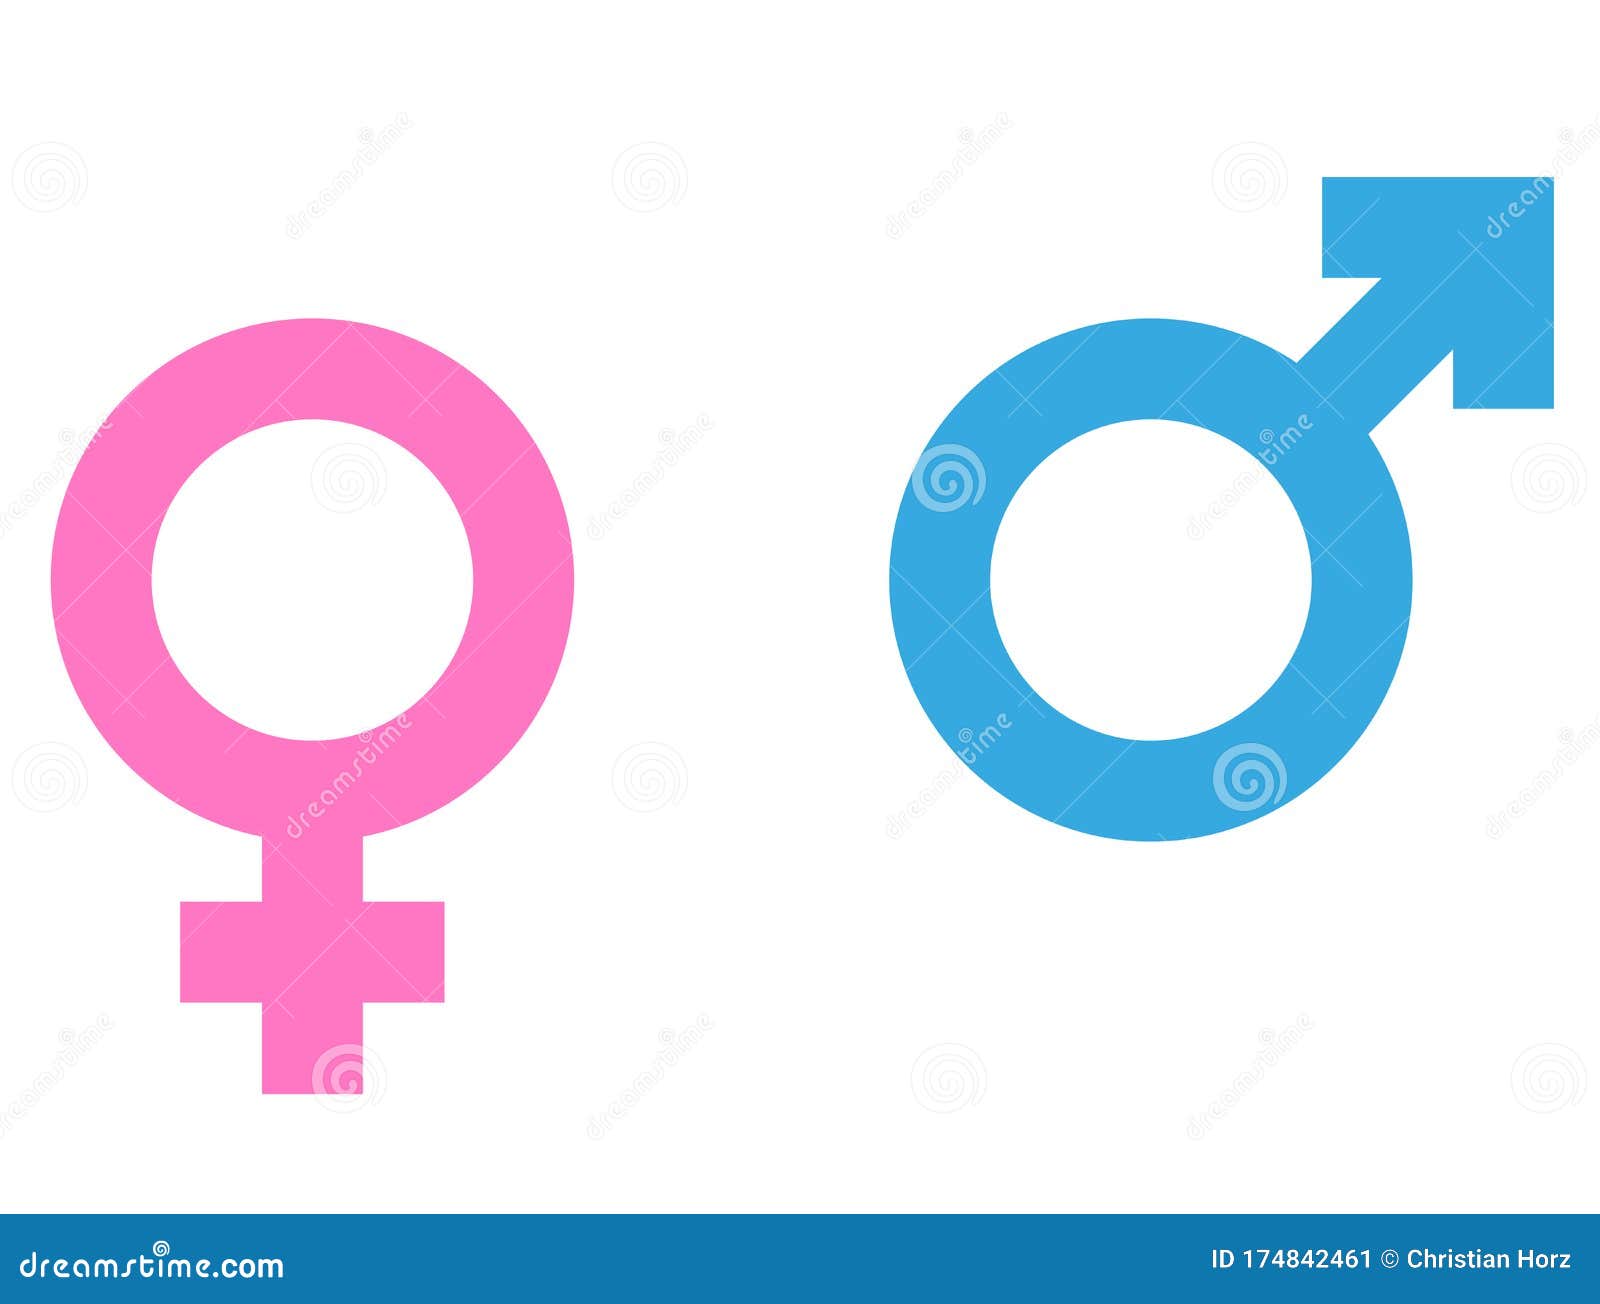 Male and Female Gender Symbols or Icons Vector Stock Vector ...